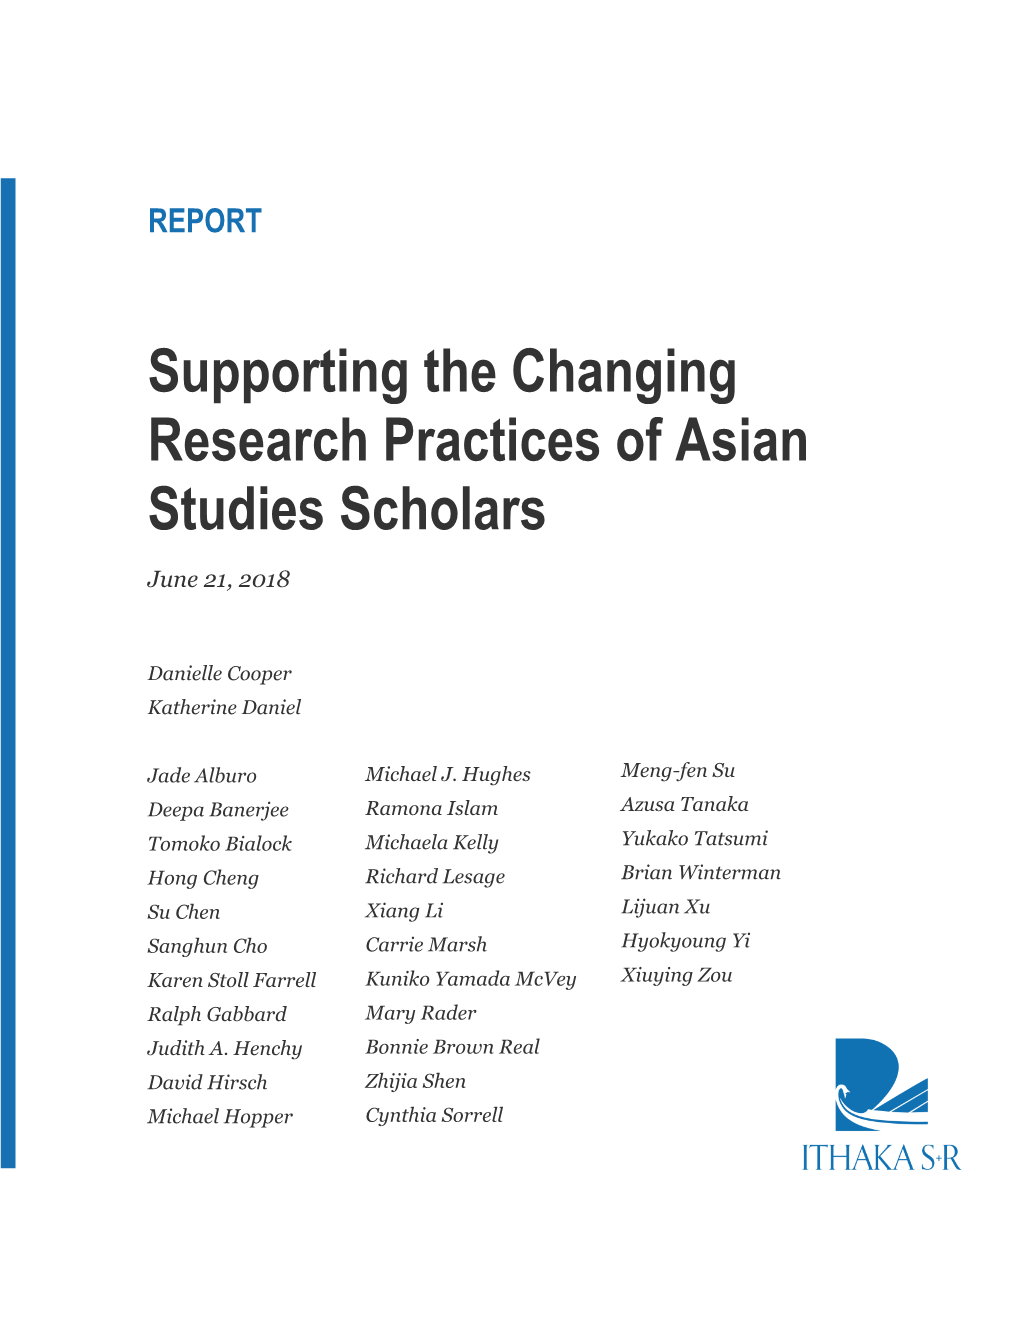 Supporting the Changing Research Practices of Asian Studies Scholars June 21, 2018